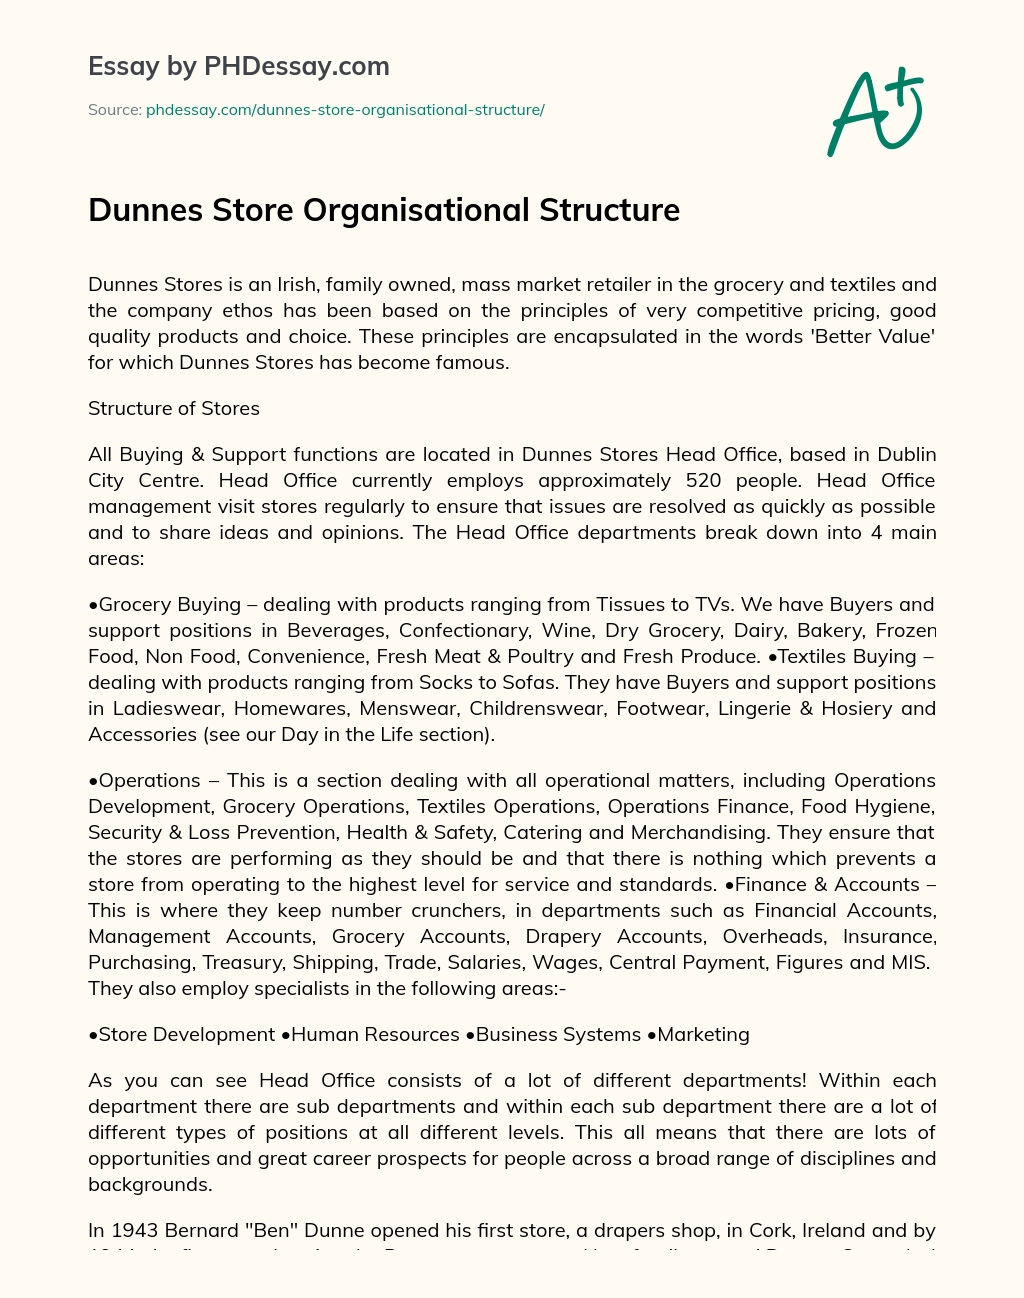 Dunnes Store Organisational Structure essay